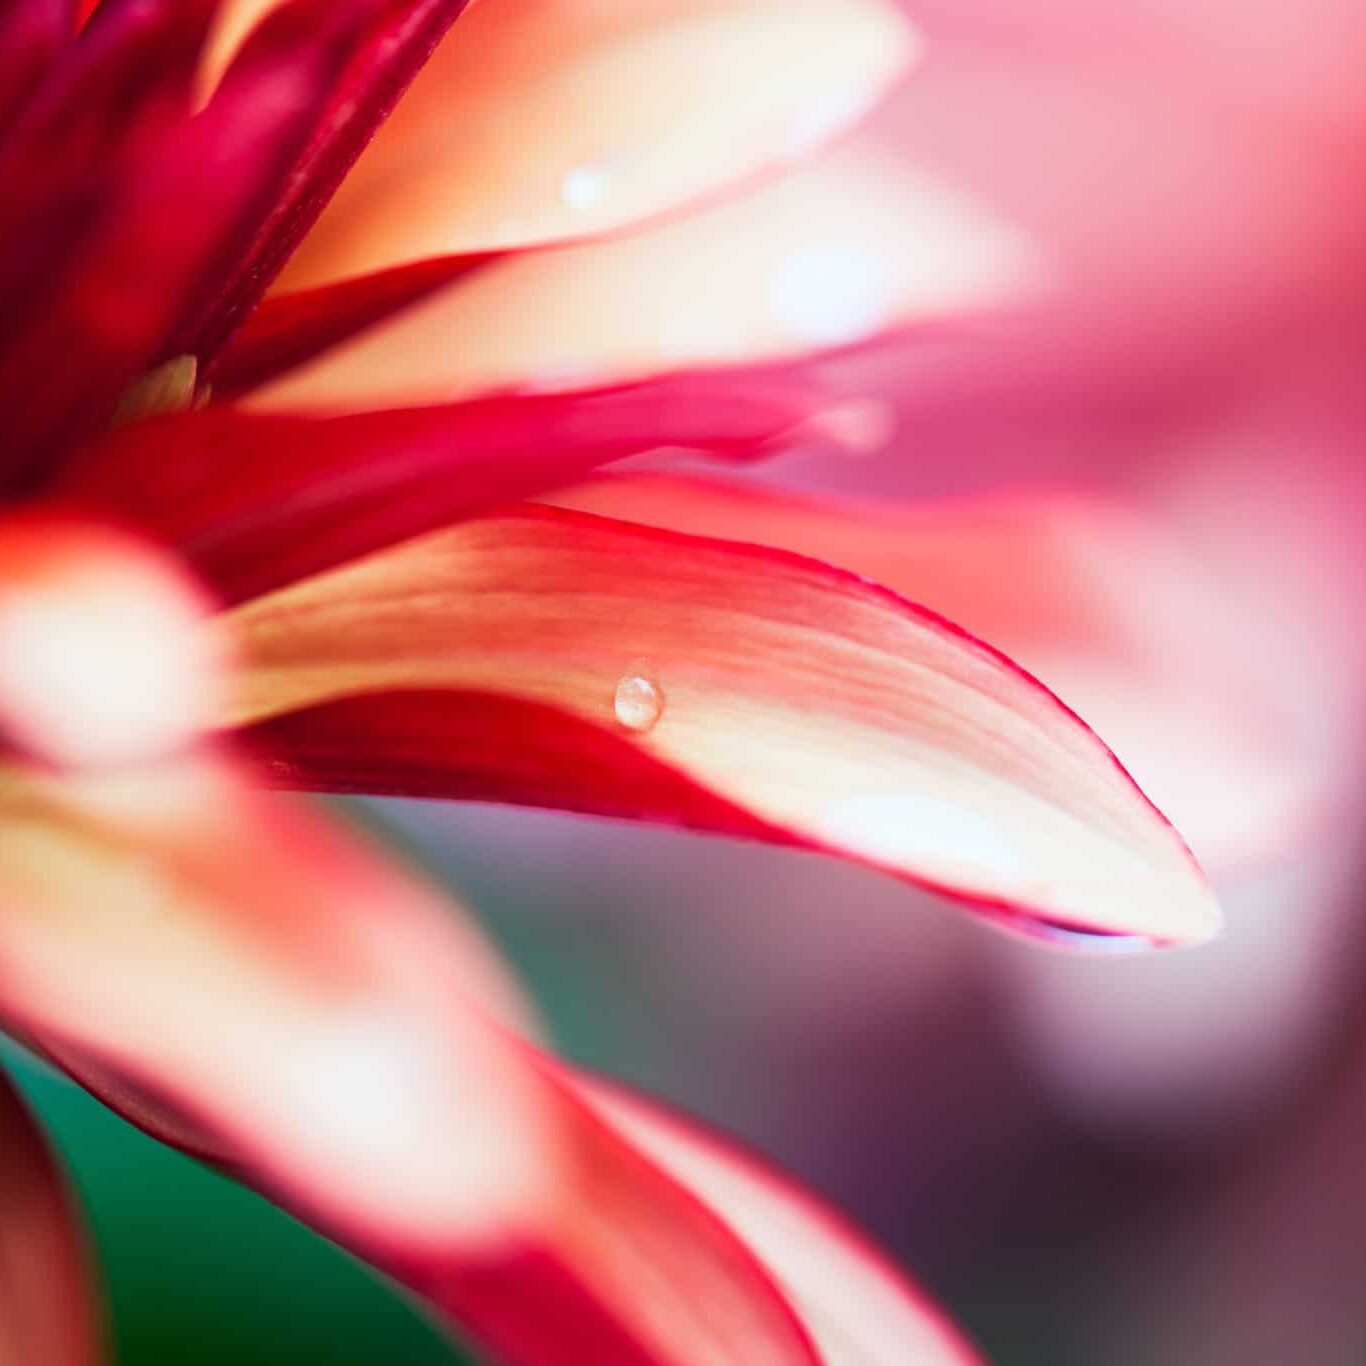 Macro shot of a pink flower - abstract details